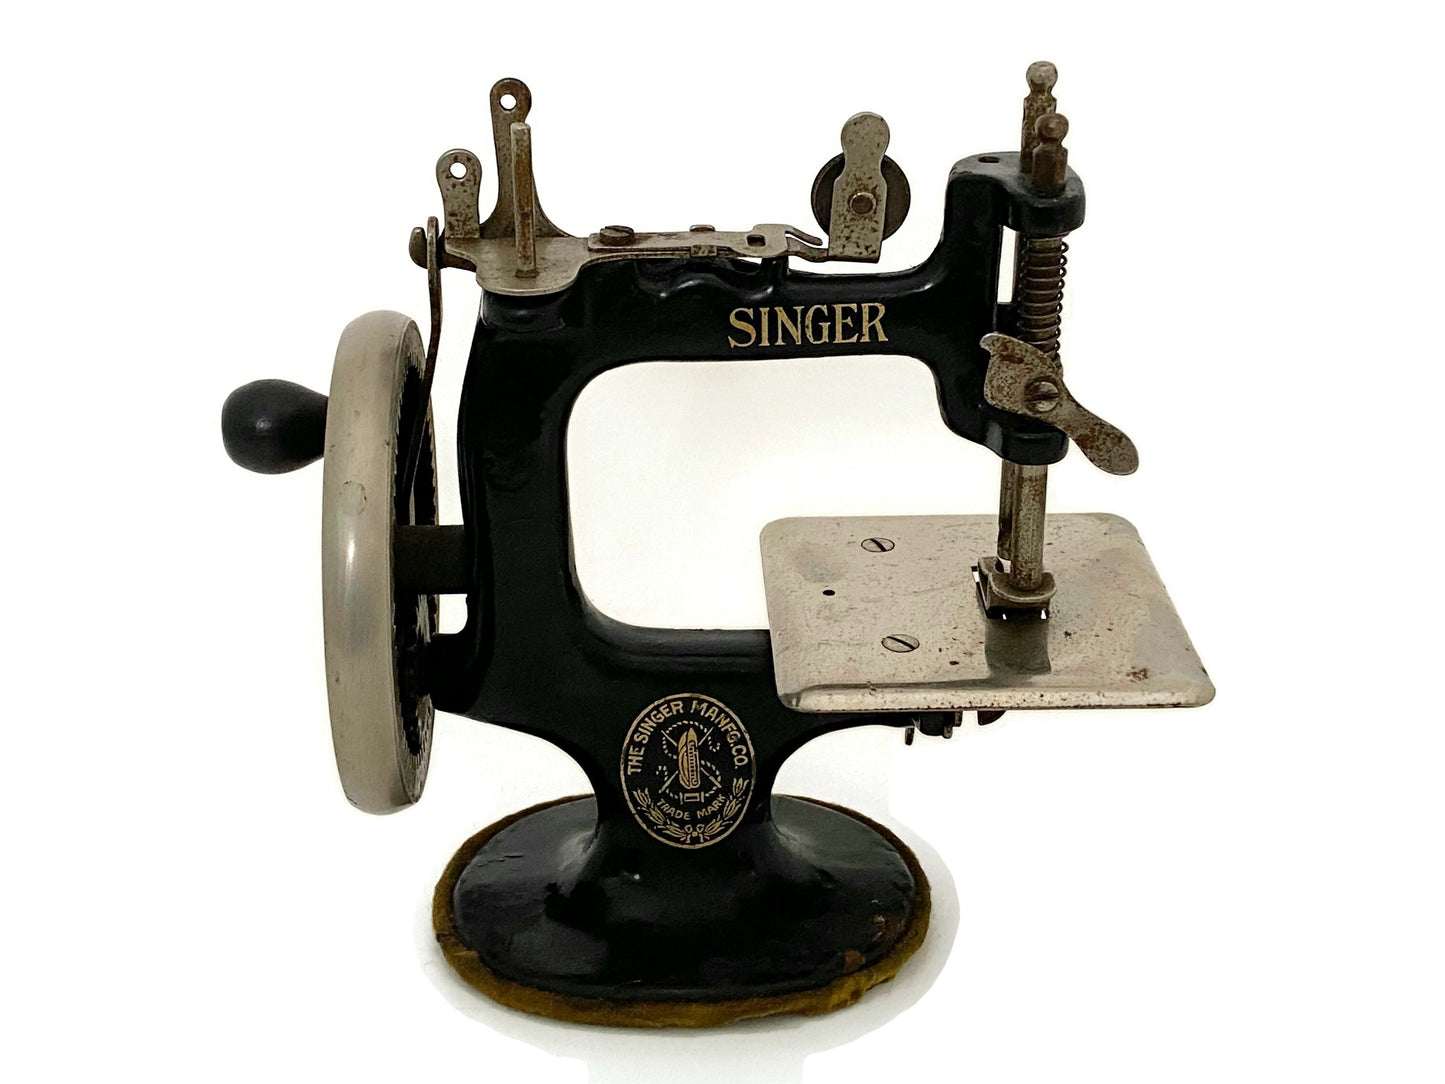 Vintage Early Singer Sewing Machine, Model 20 with 7 Spokes